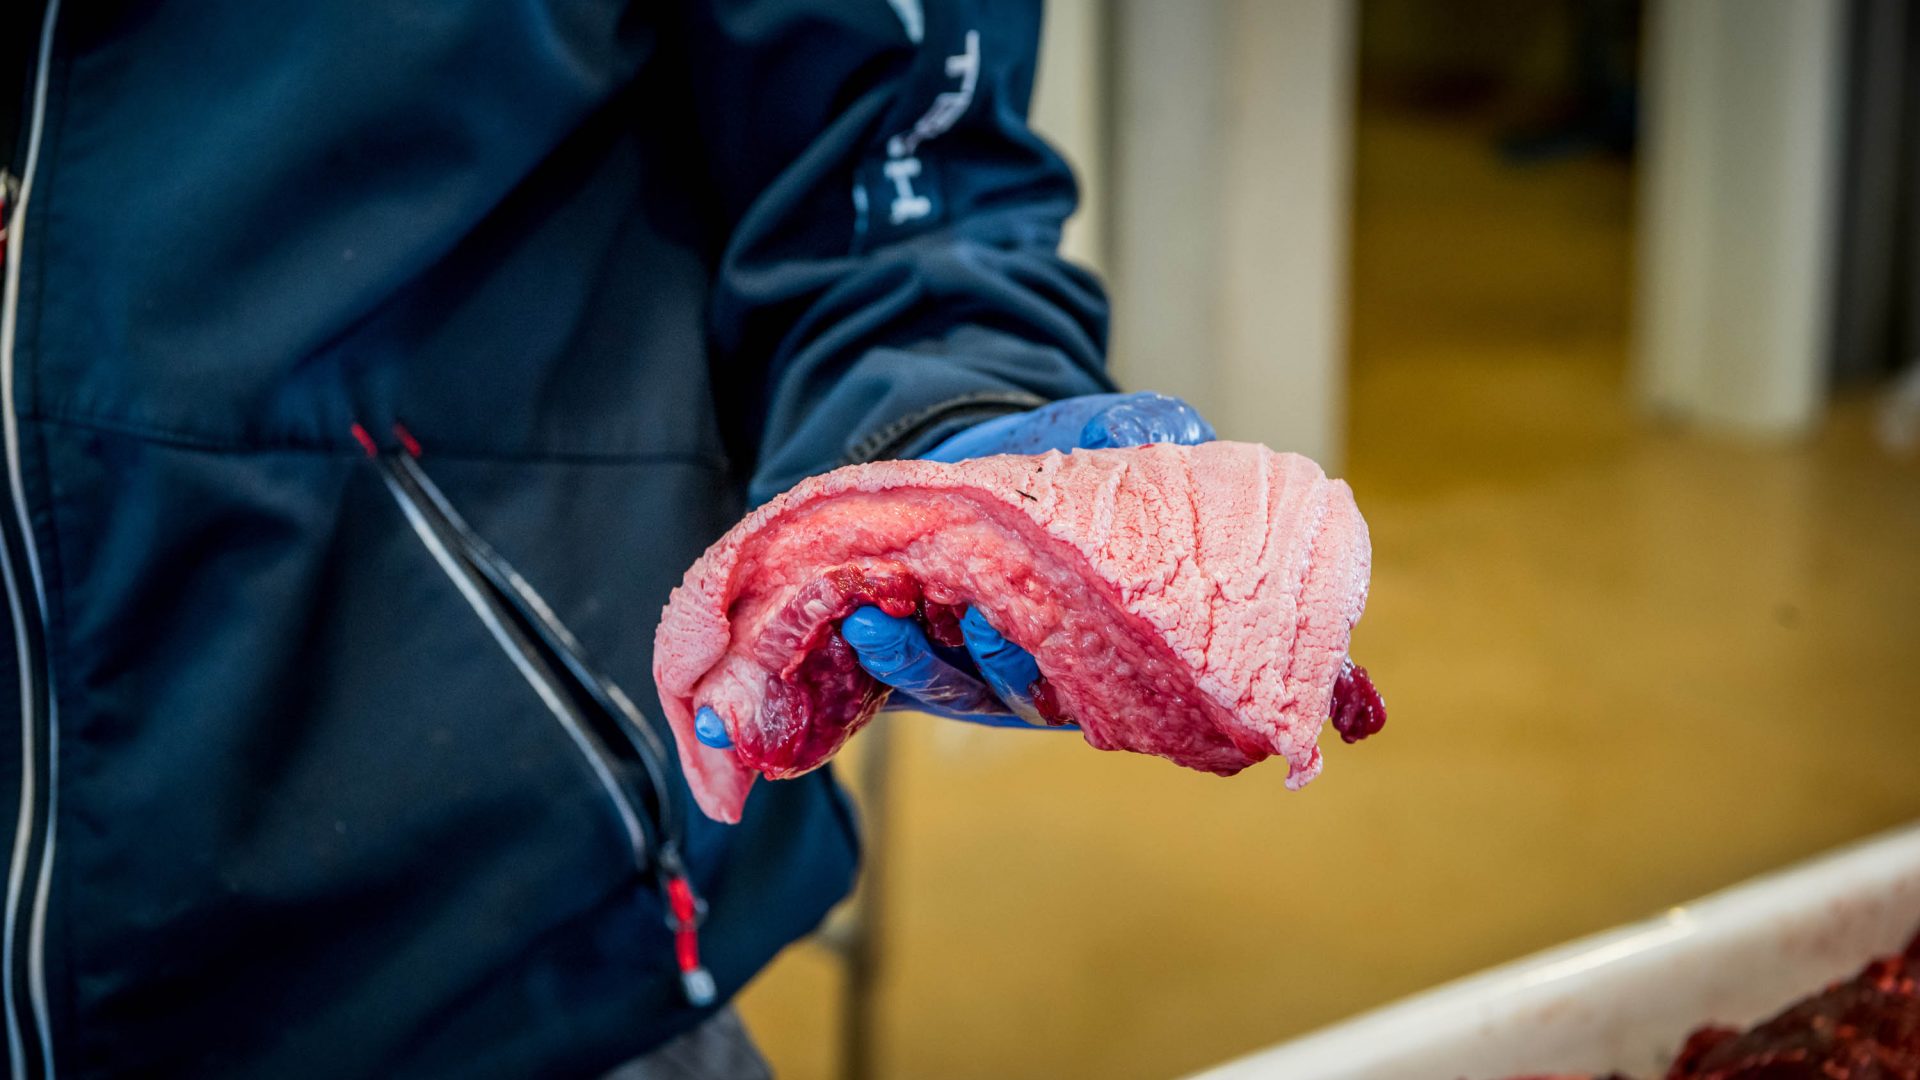 Cuts of flesh, such as this whale tongue, usually associated with a butcher are on display at Kalaaliaraq market.